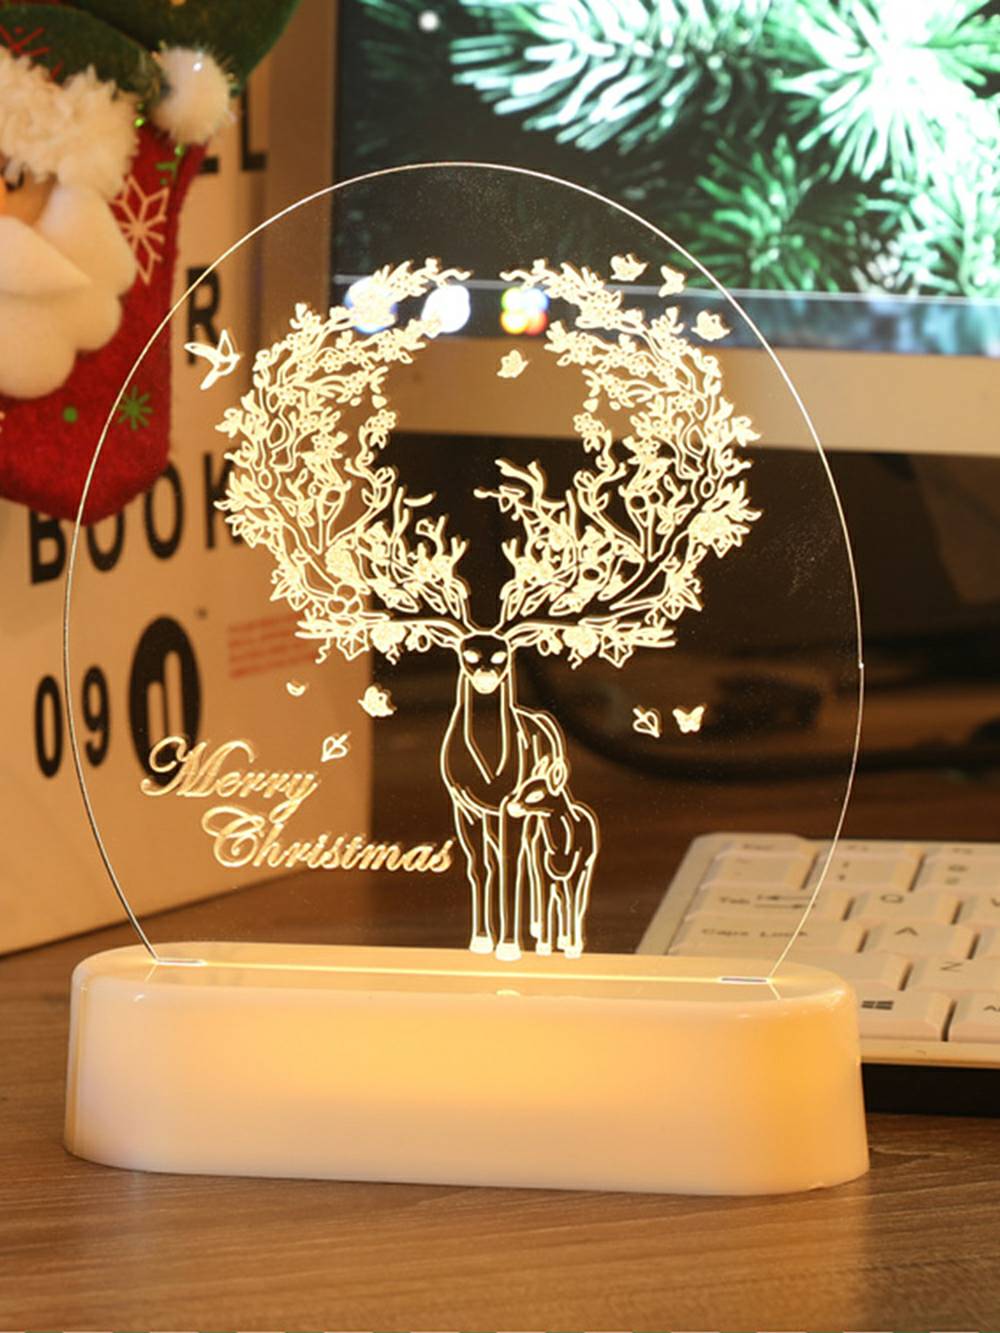 Delicate Cartoon LED Night Lights for Holiday Bedroom Decor